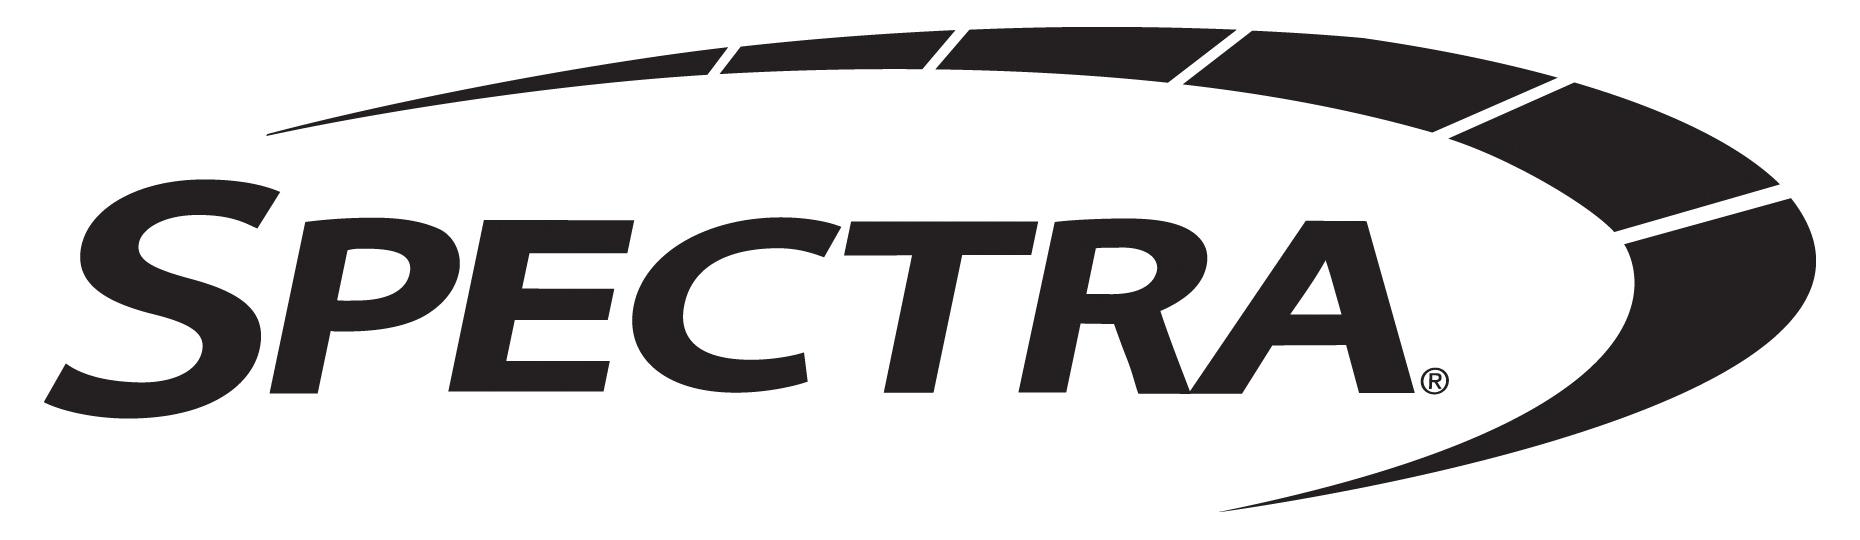 Spectra Logo - Logos and Product Image